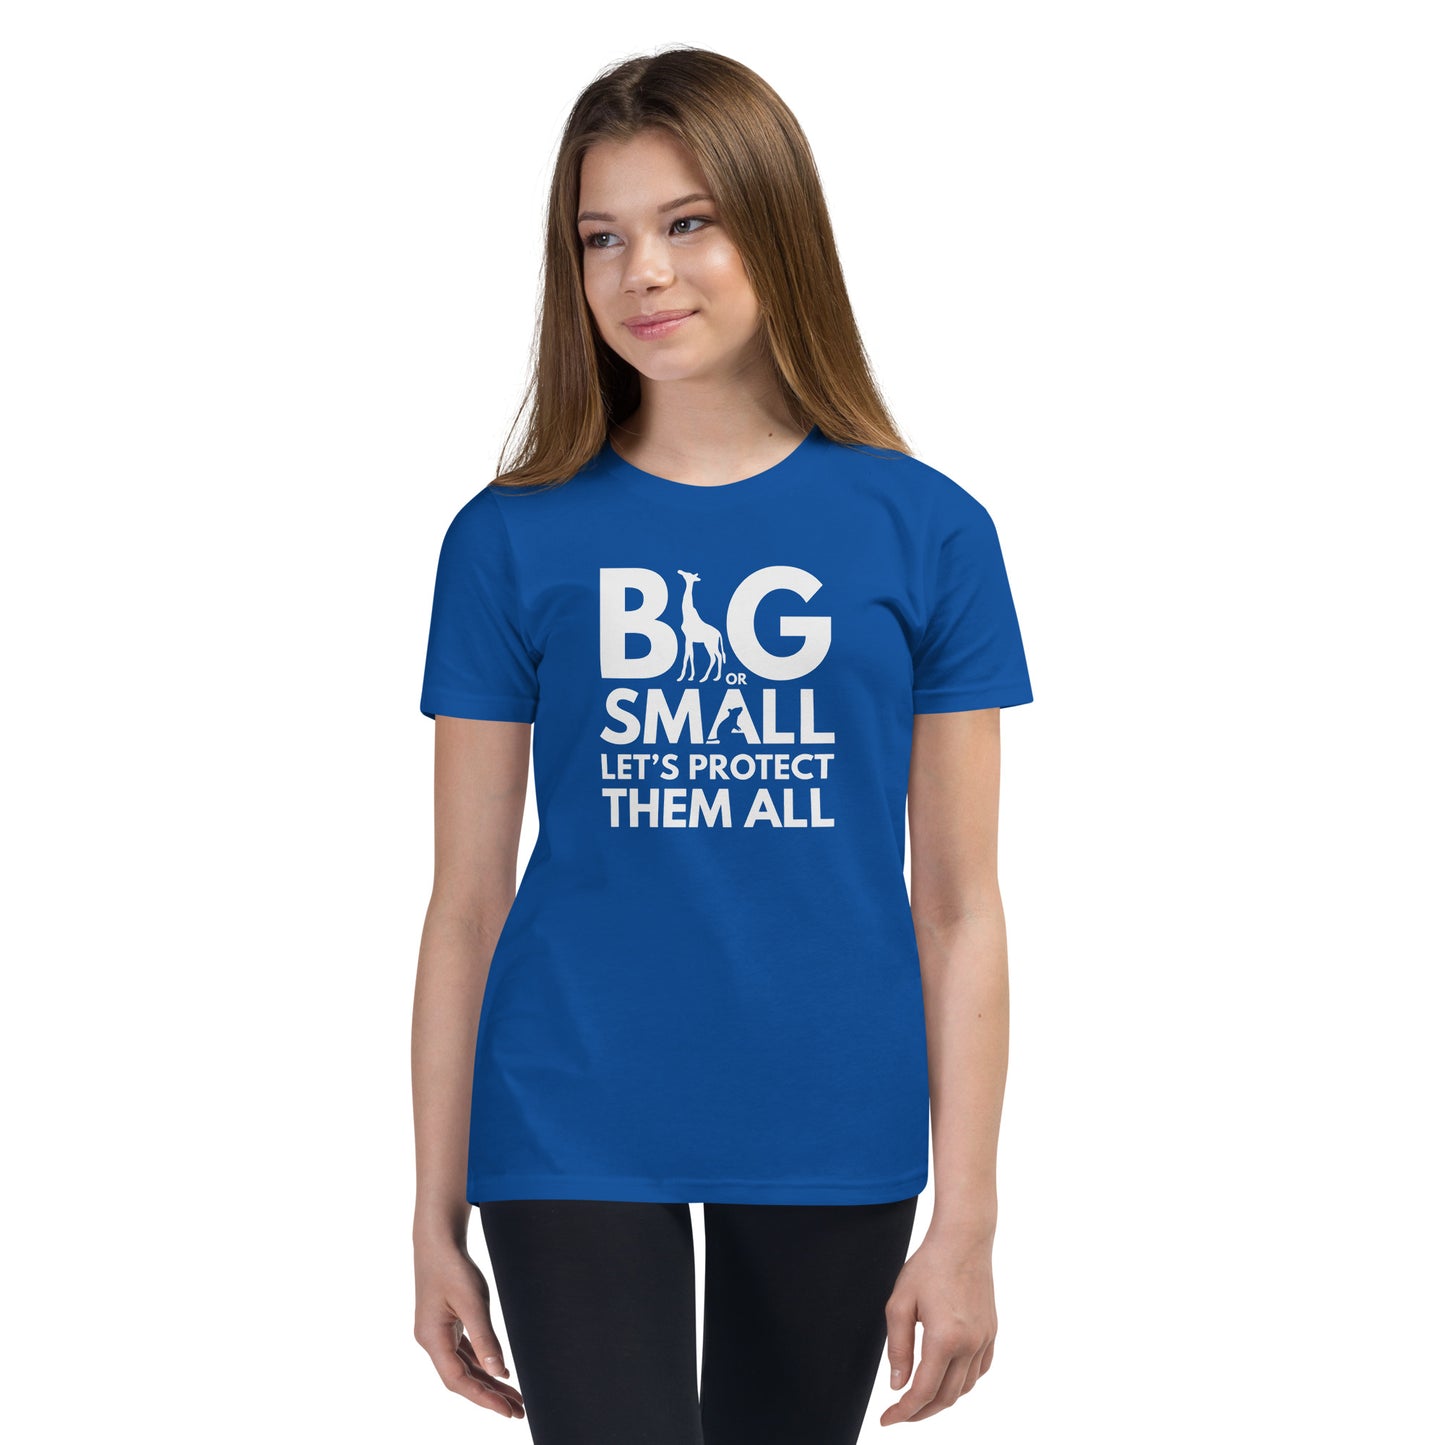 Big Or Small, Let's Protect Them All - Youth Short Sleeve T-Shirt